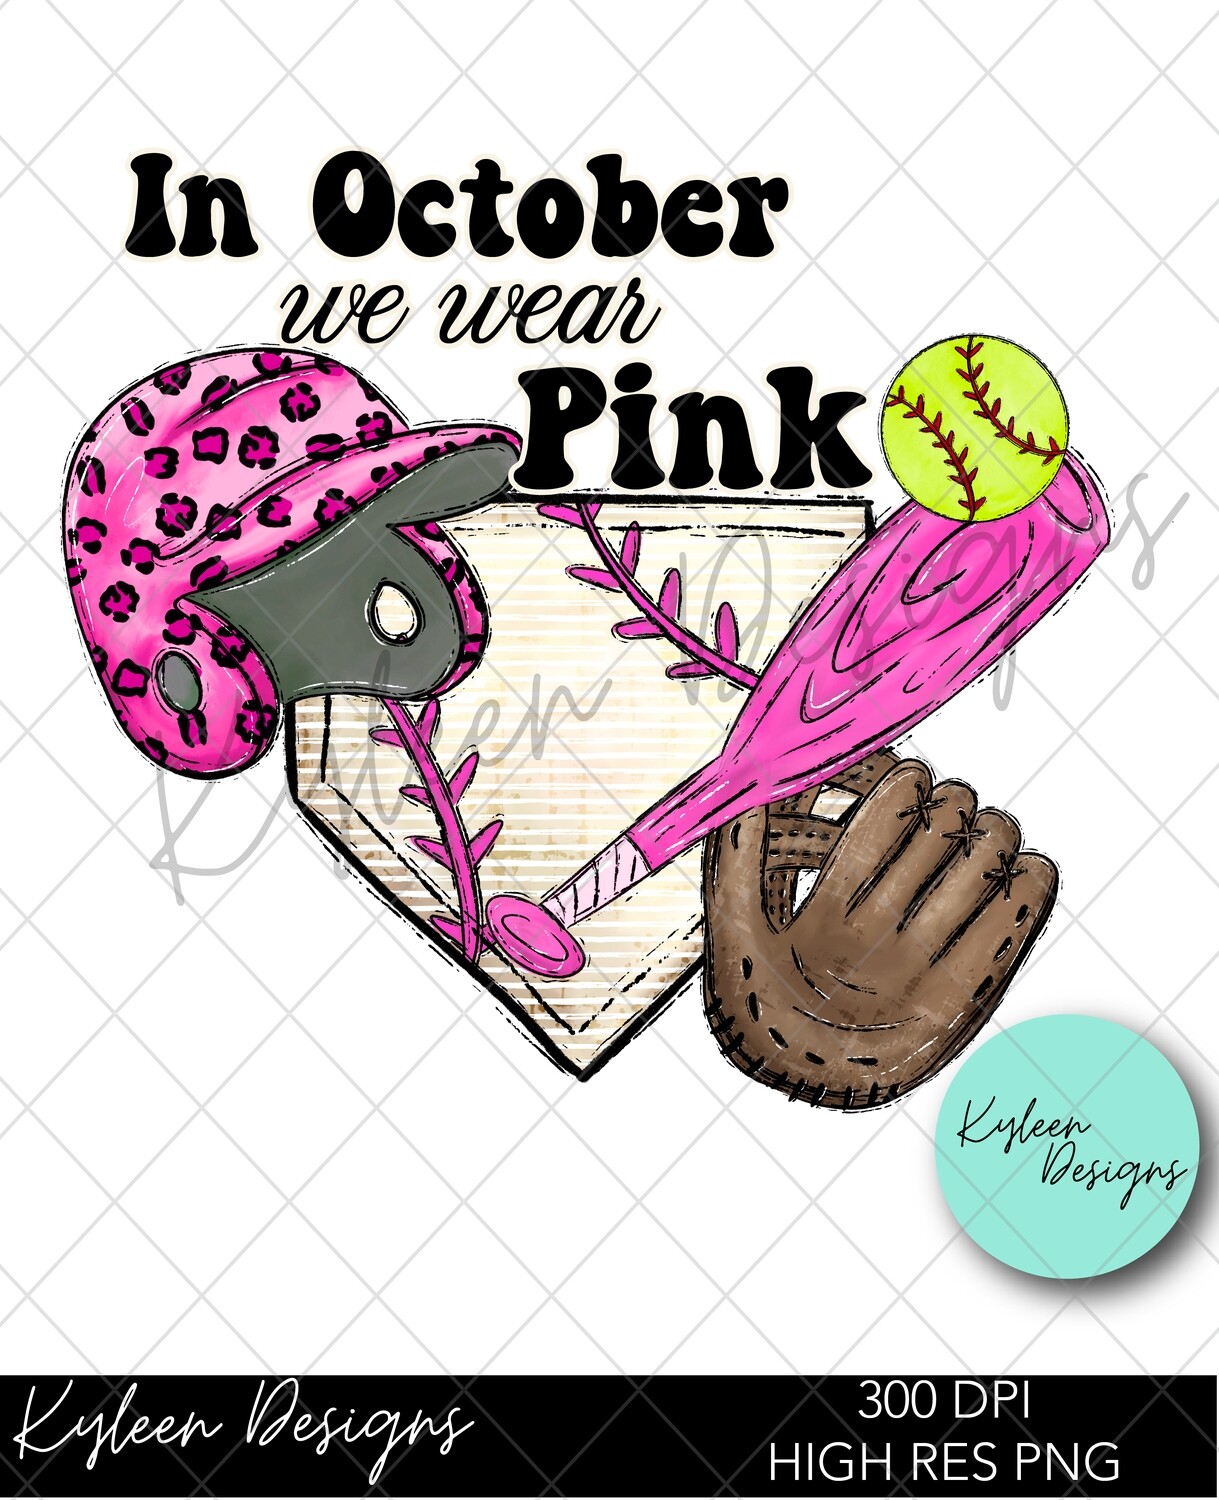 In October we wear pink SOFTBALL high res PNG